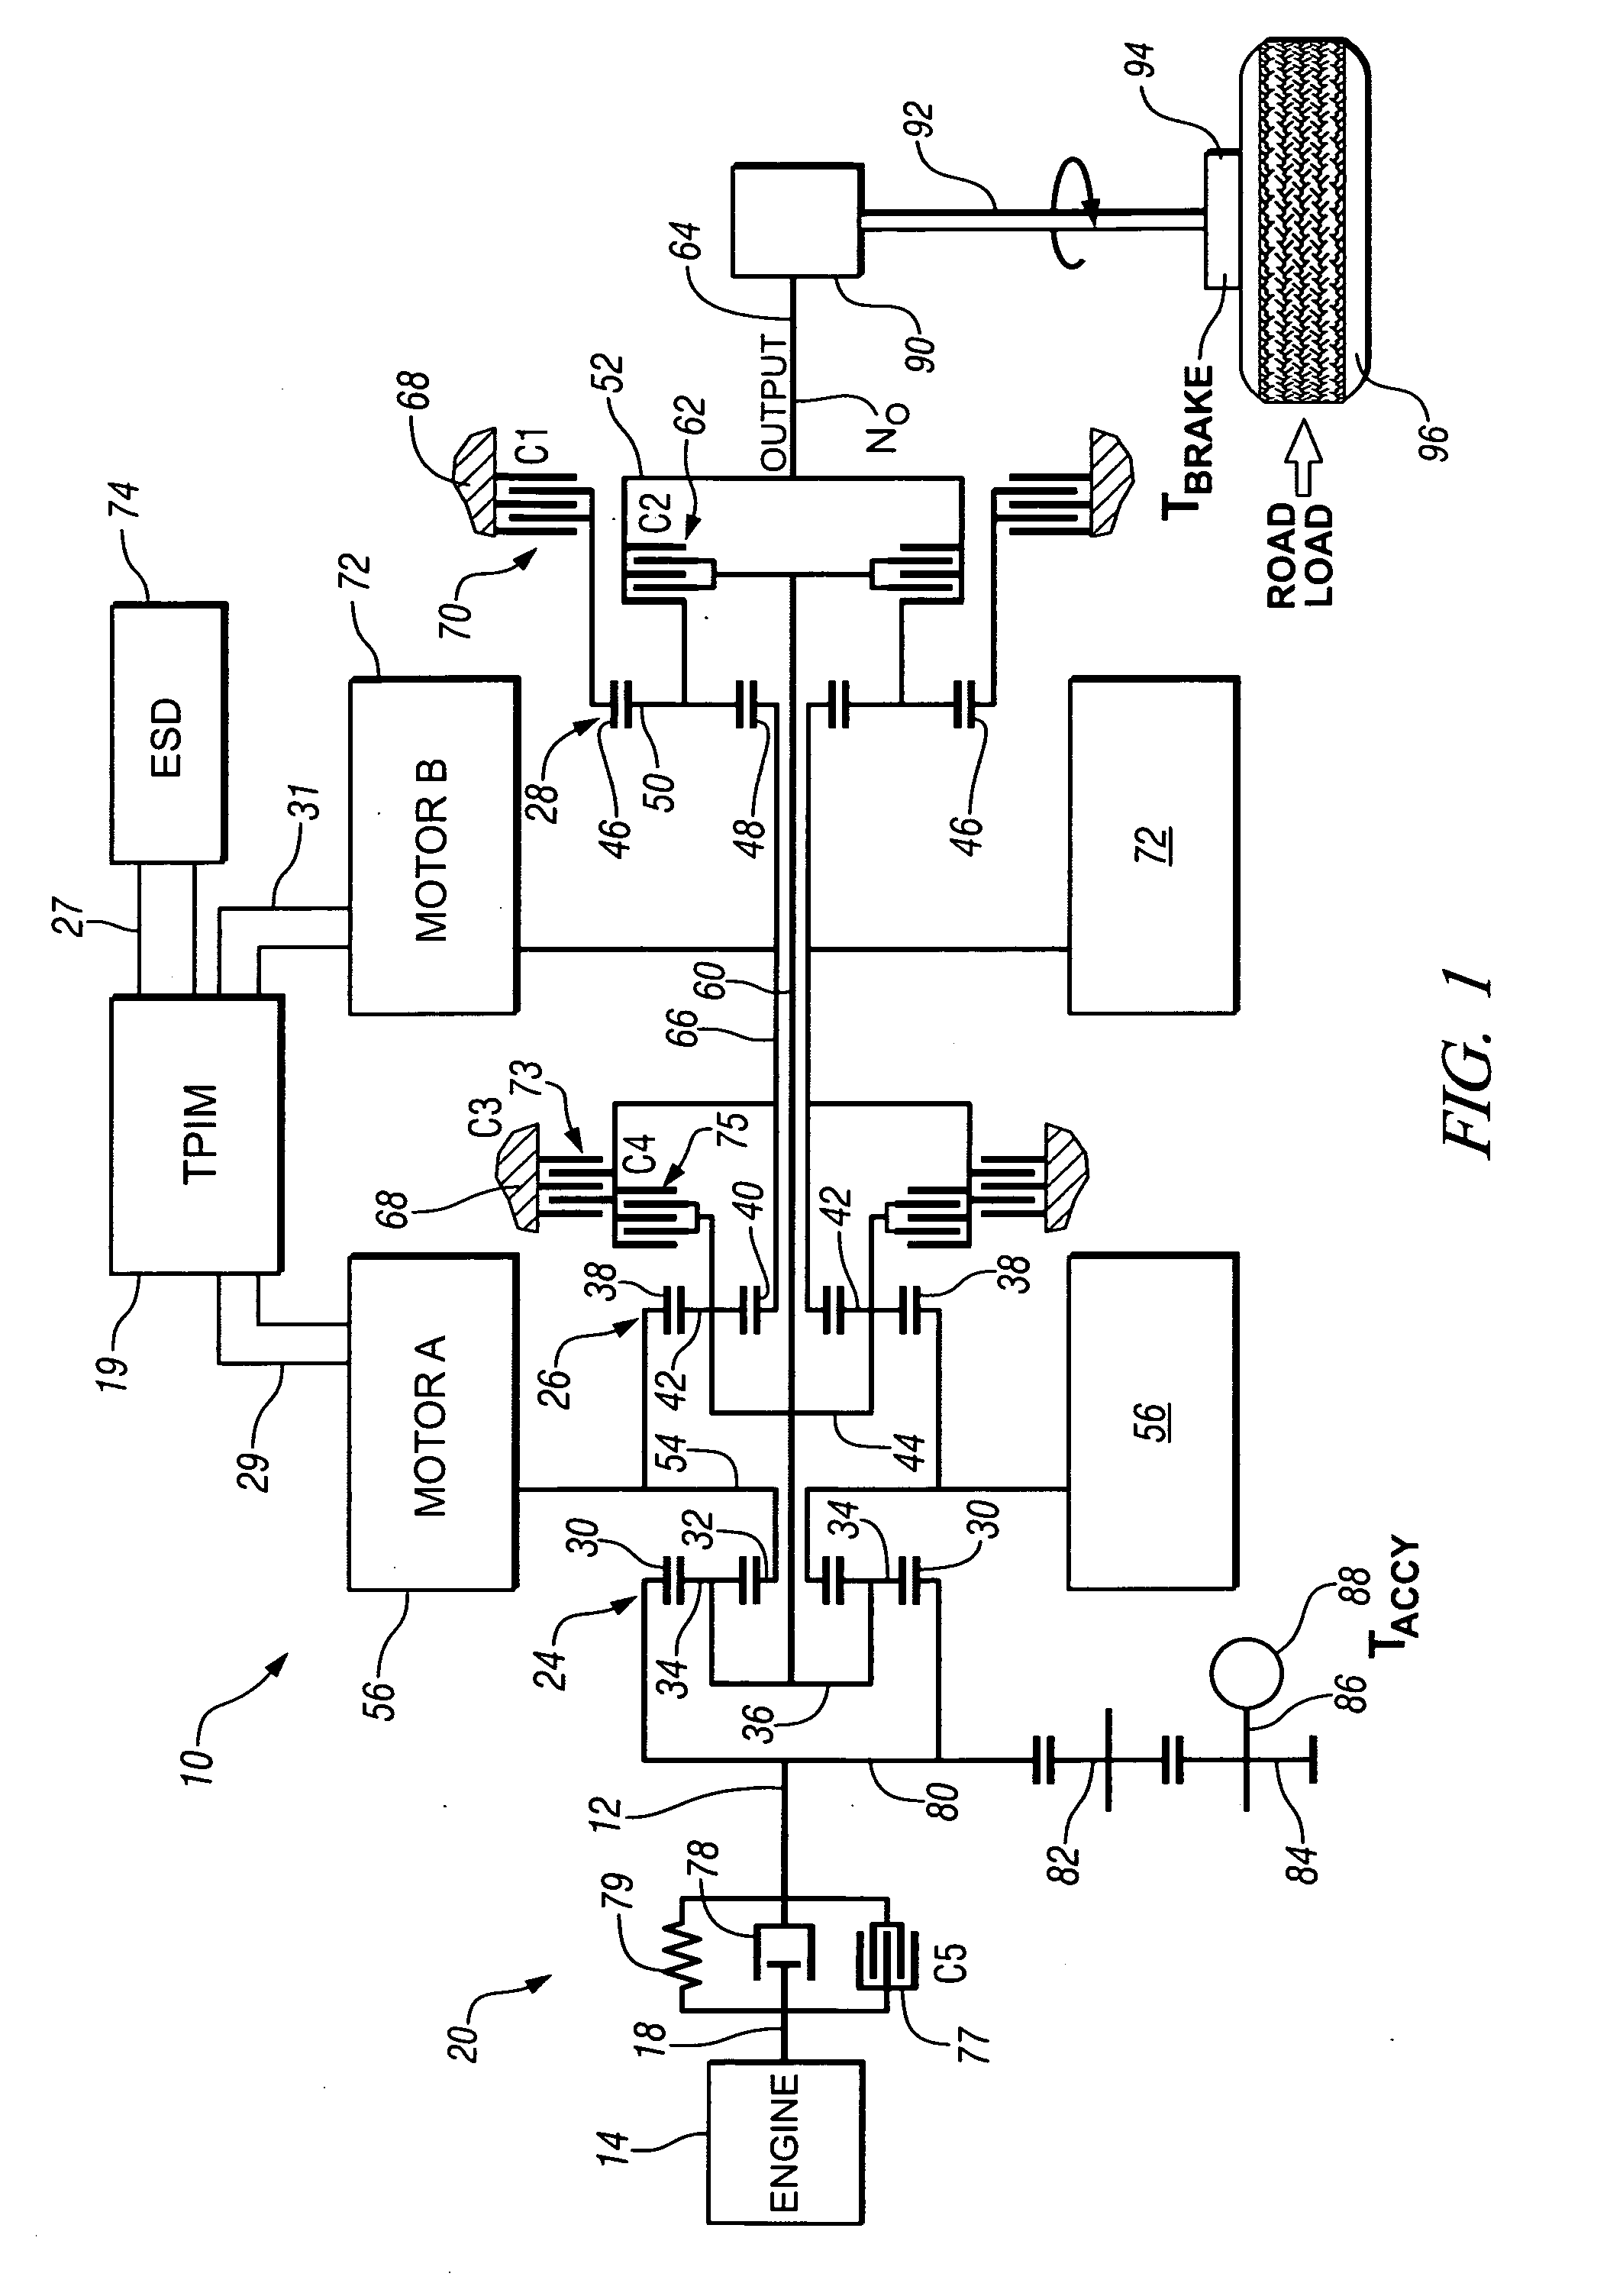 Method and apparatus for multivariate active driveline damping